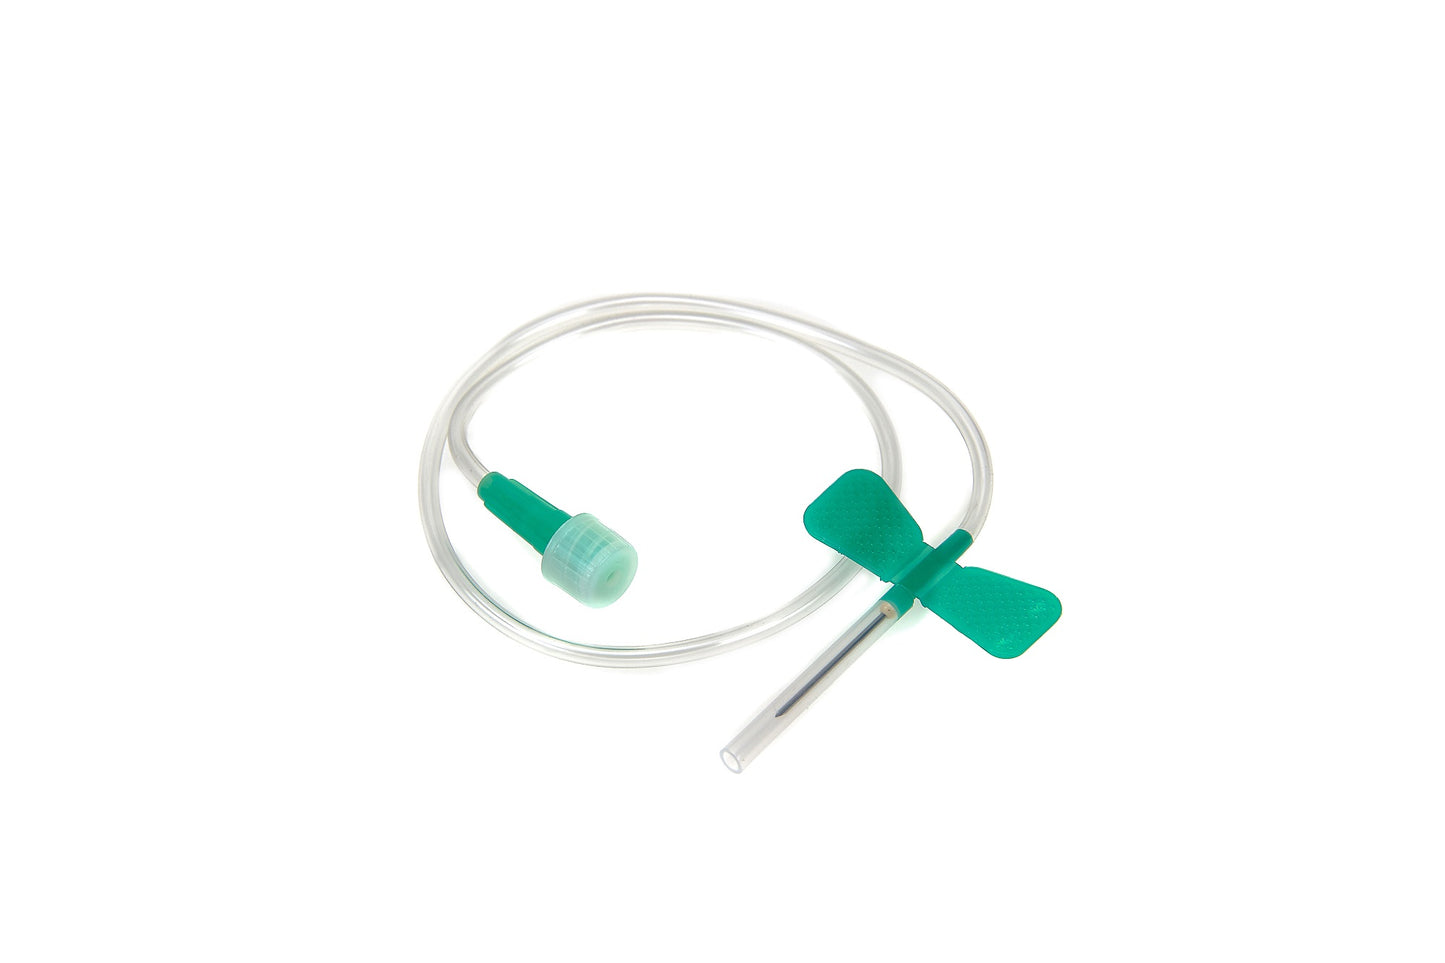 Romed Perfusionsbestecke - Butterfly - Infusionssystem Kanüle - 100 Stück